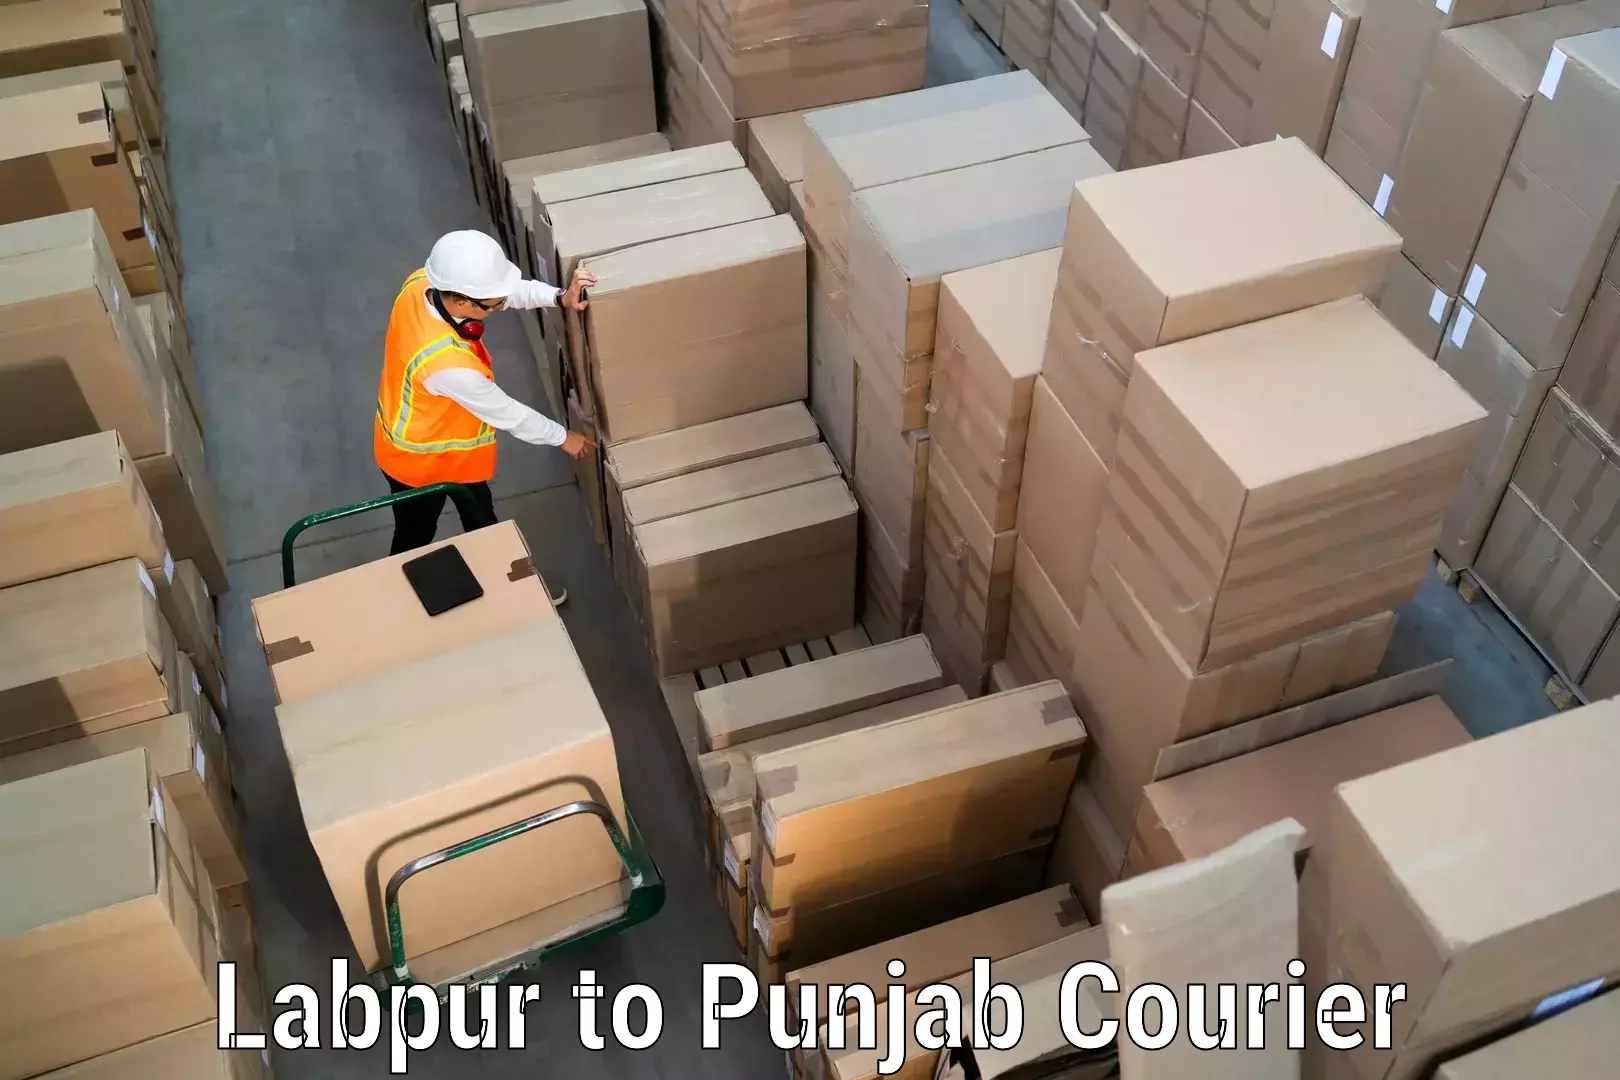 Reliable parcel services in Labpur to Muktsar